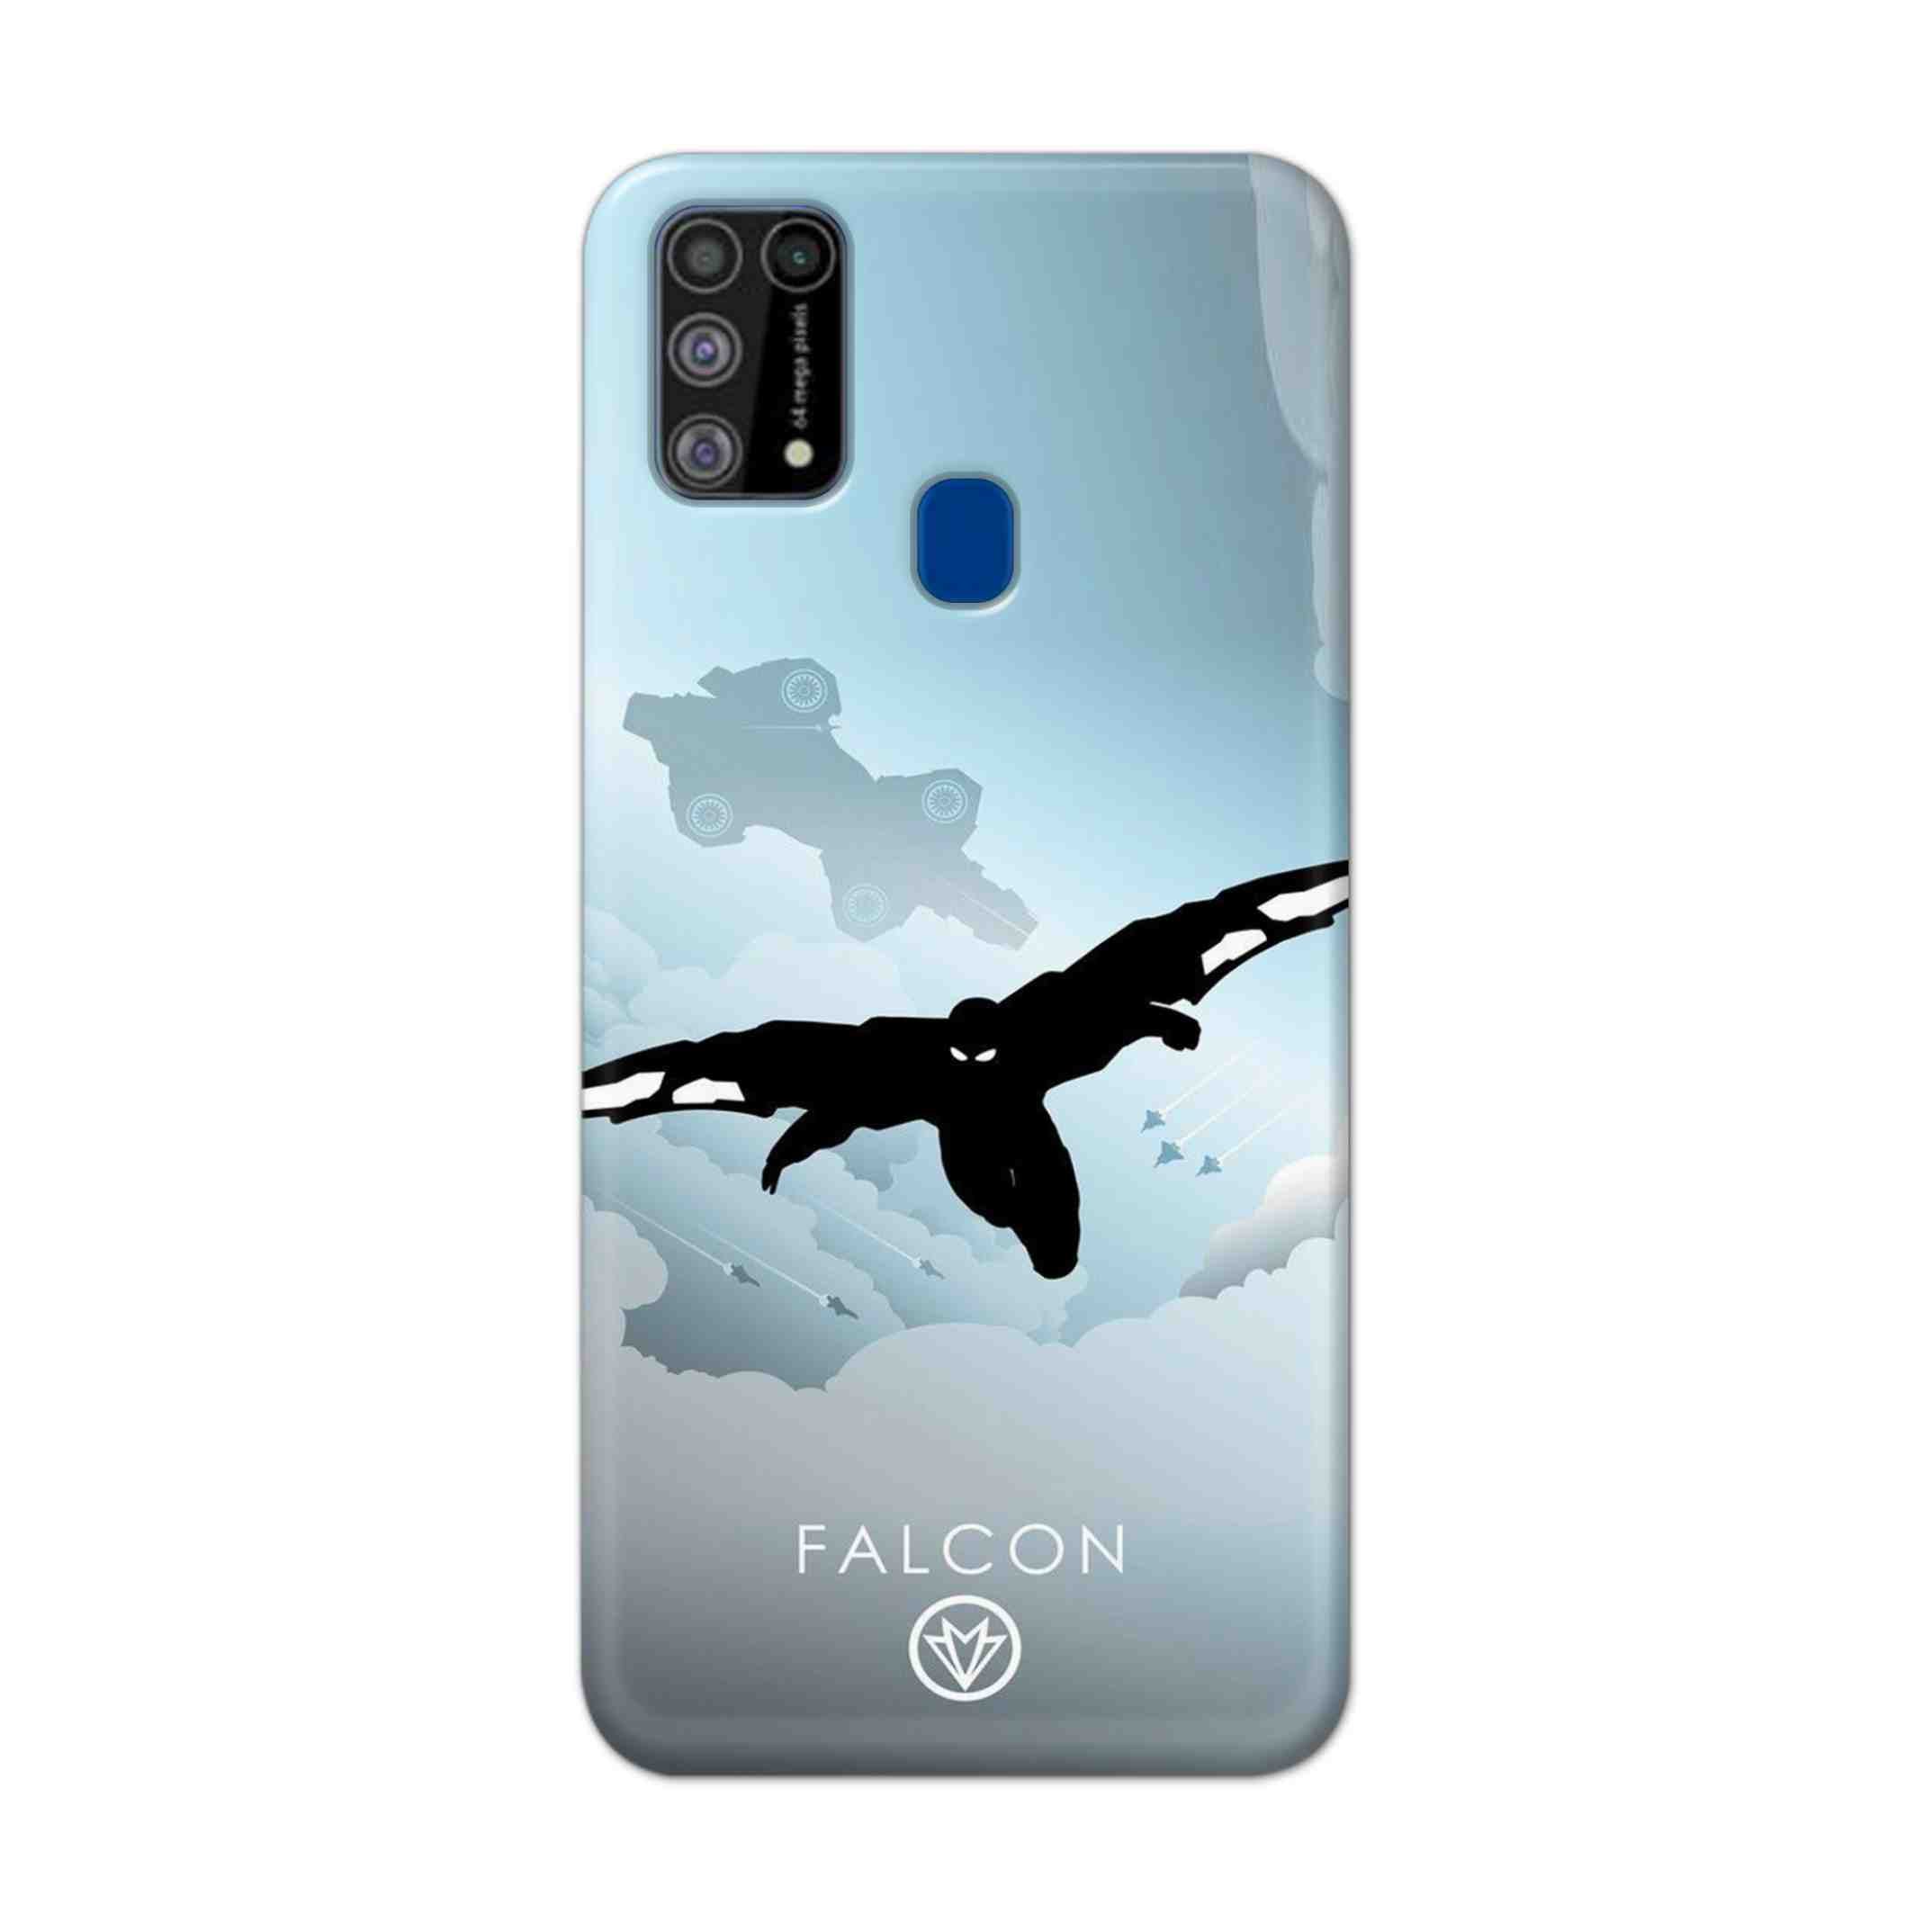 Buy Falcon Hard Back Mobile Phone Case Cover For Samsung Galaxy M31 Online